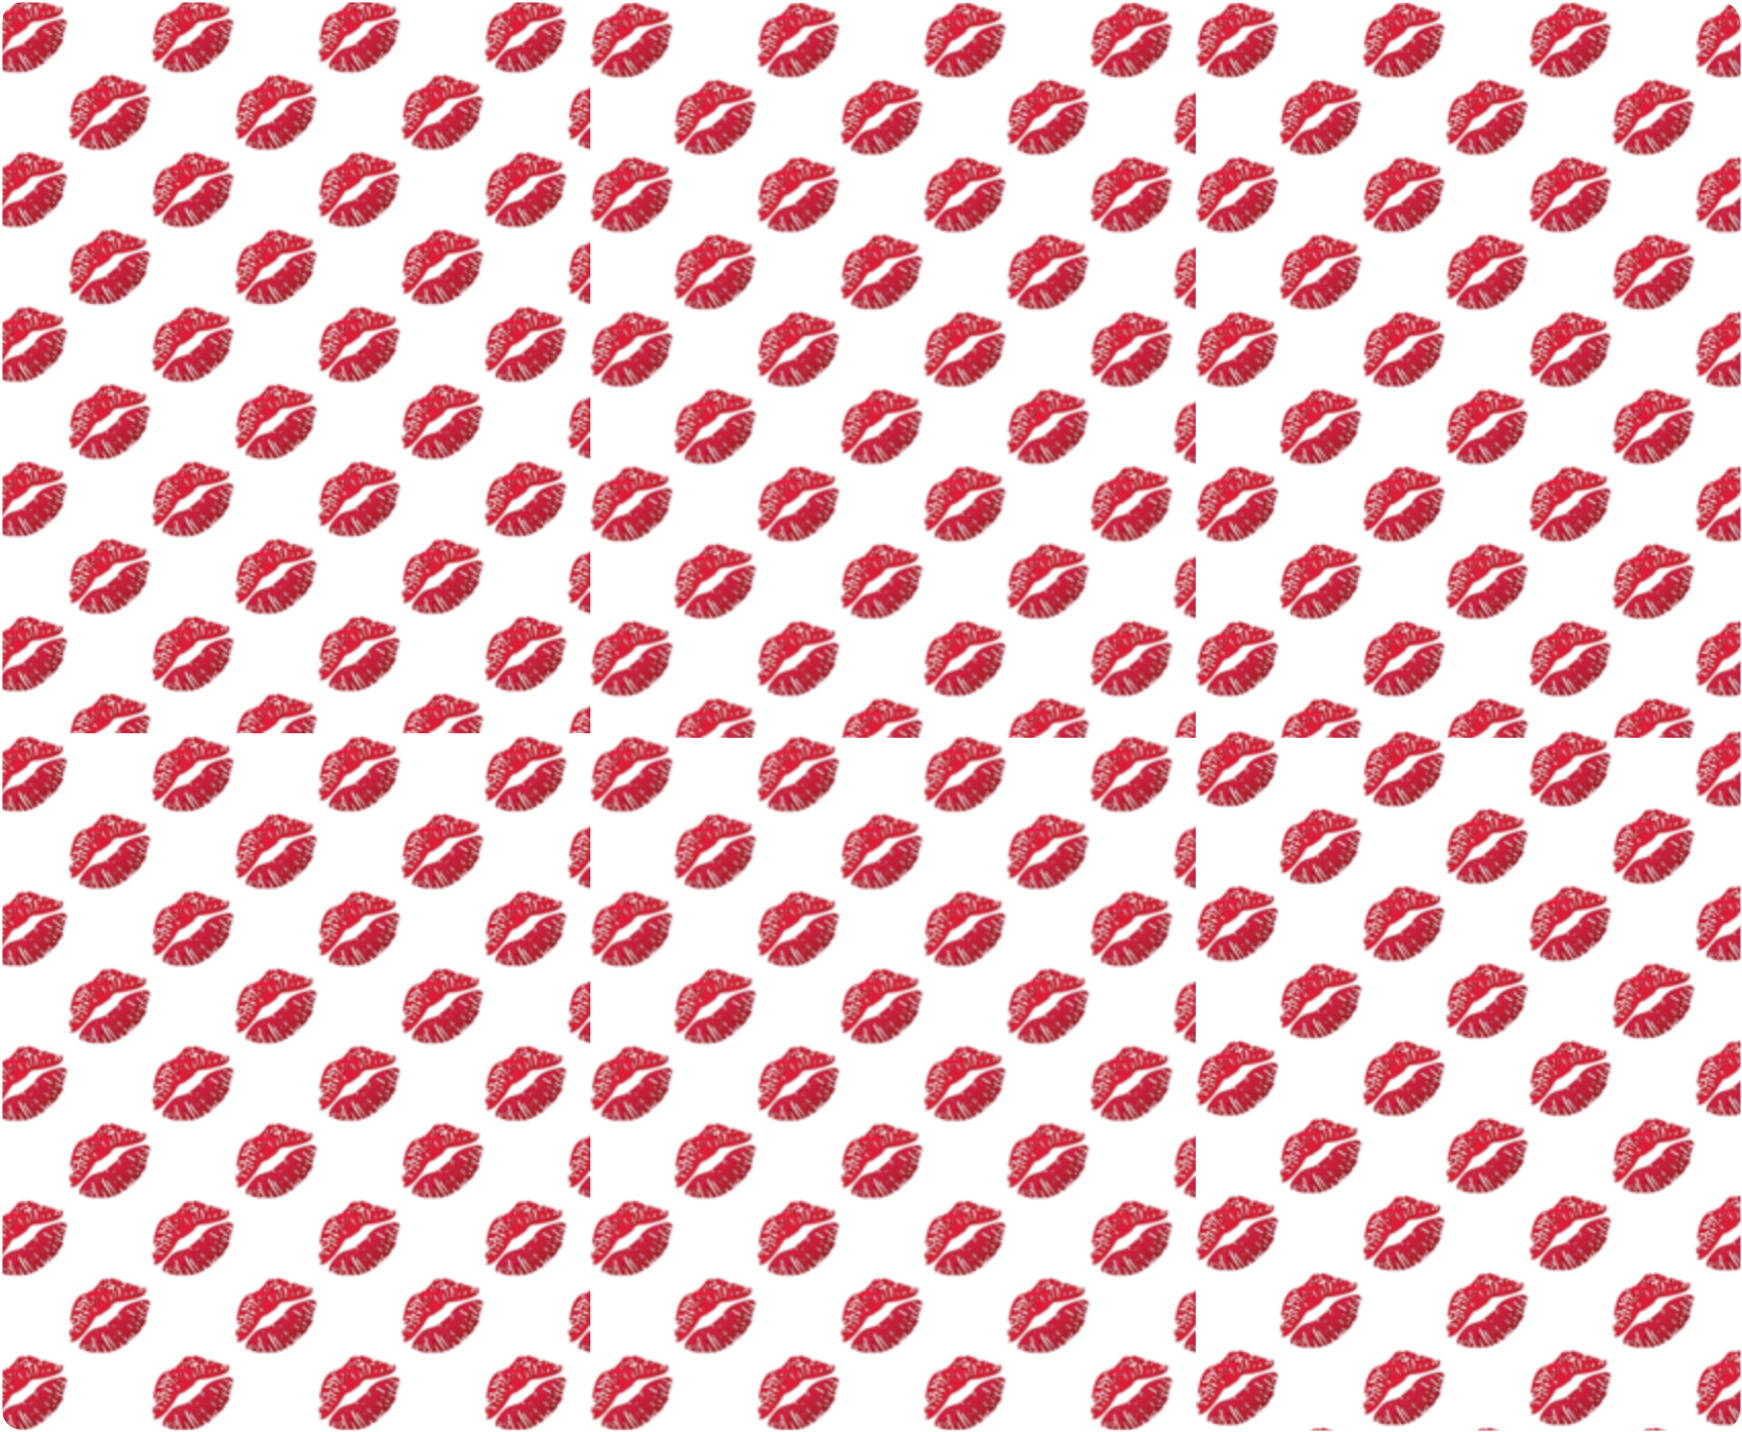 A Pattern Of Red Lips On A Black Background